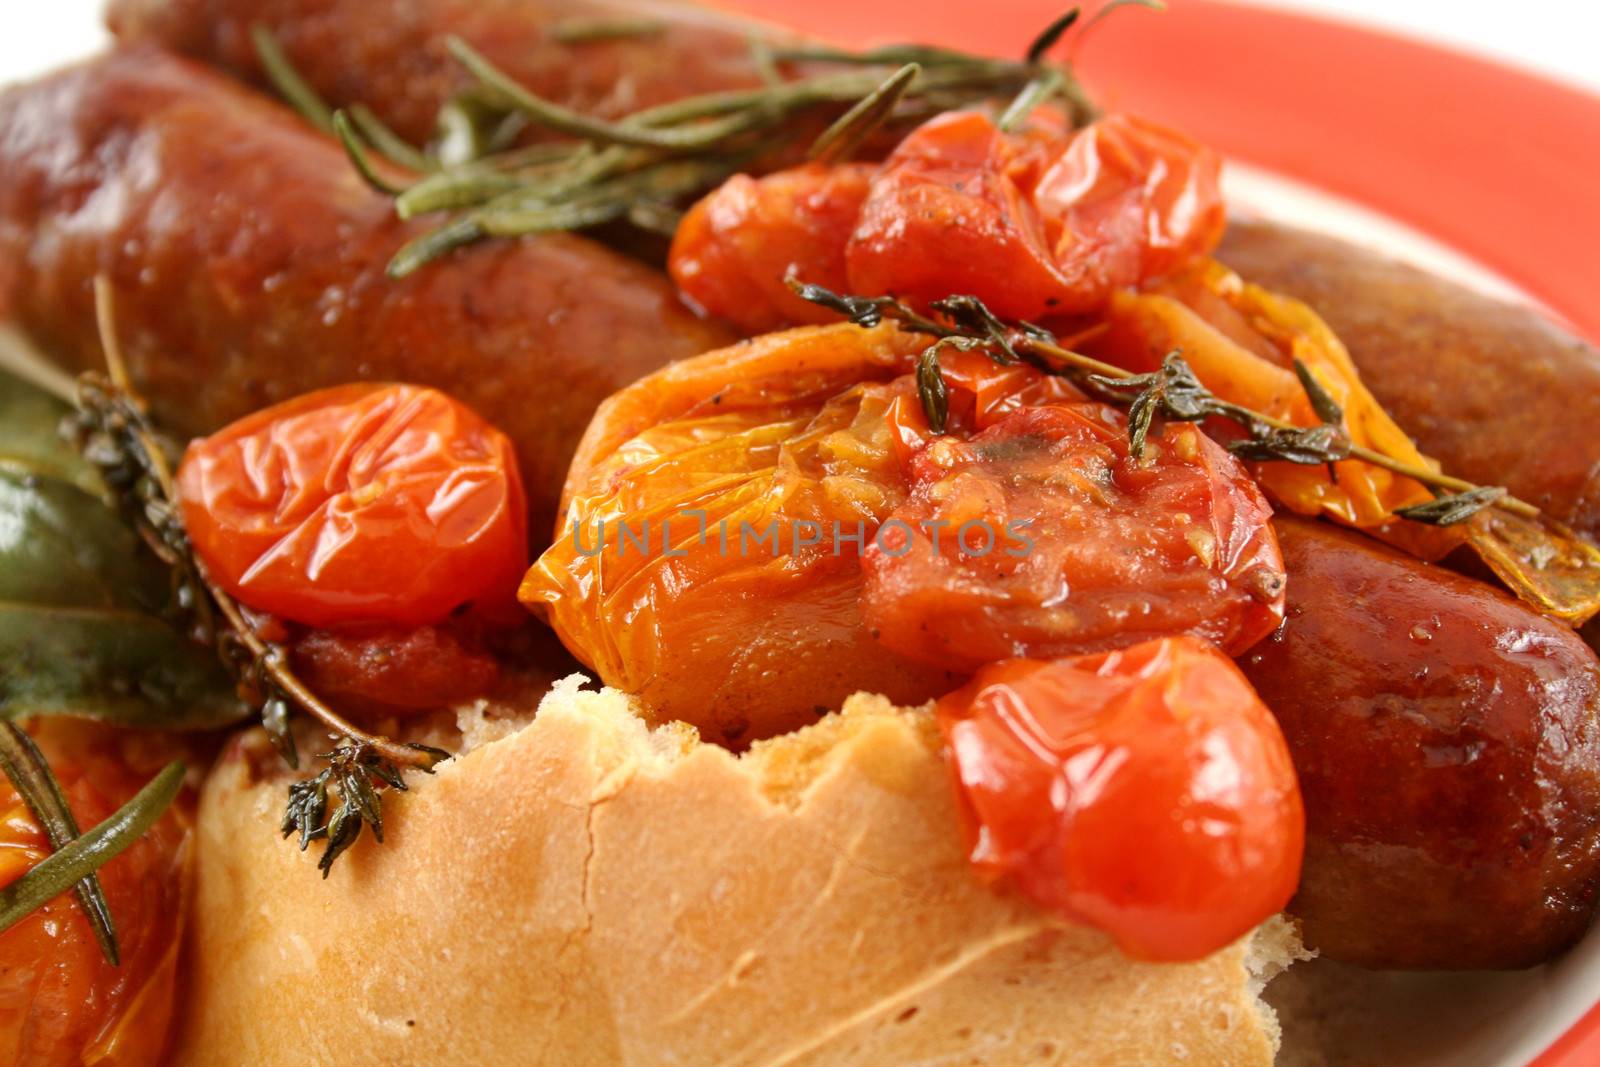 Baked Tomatoes And Sausages by jabiru